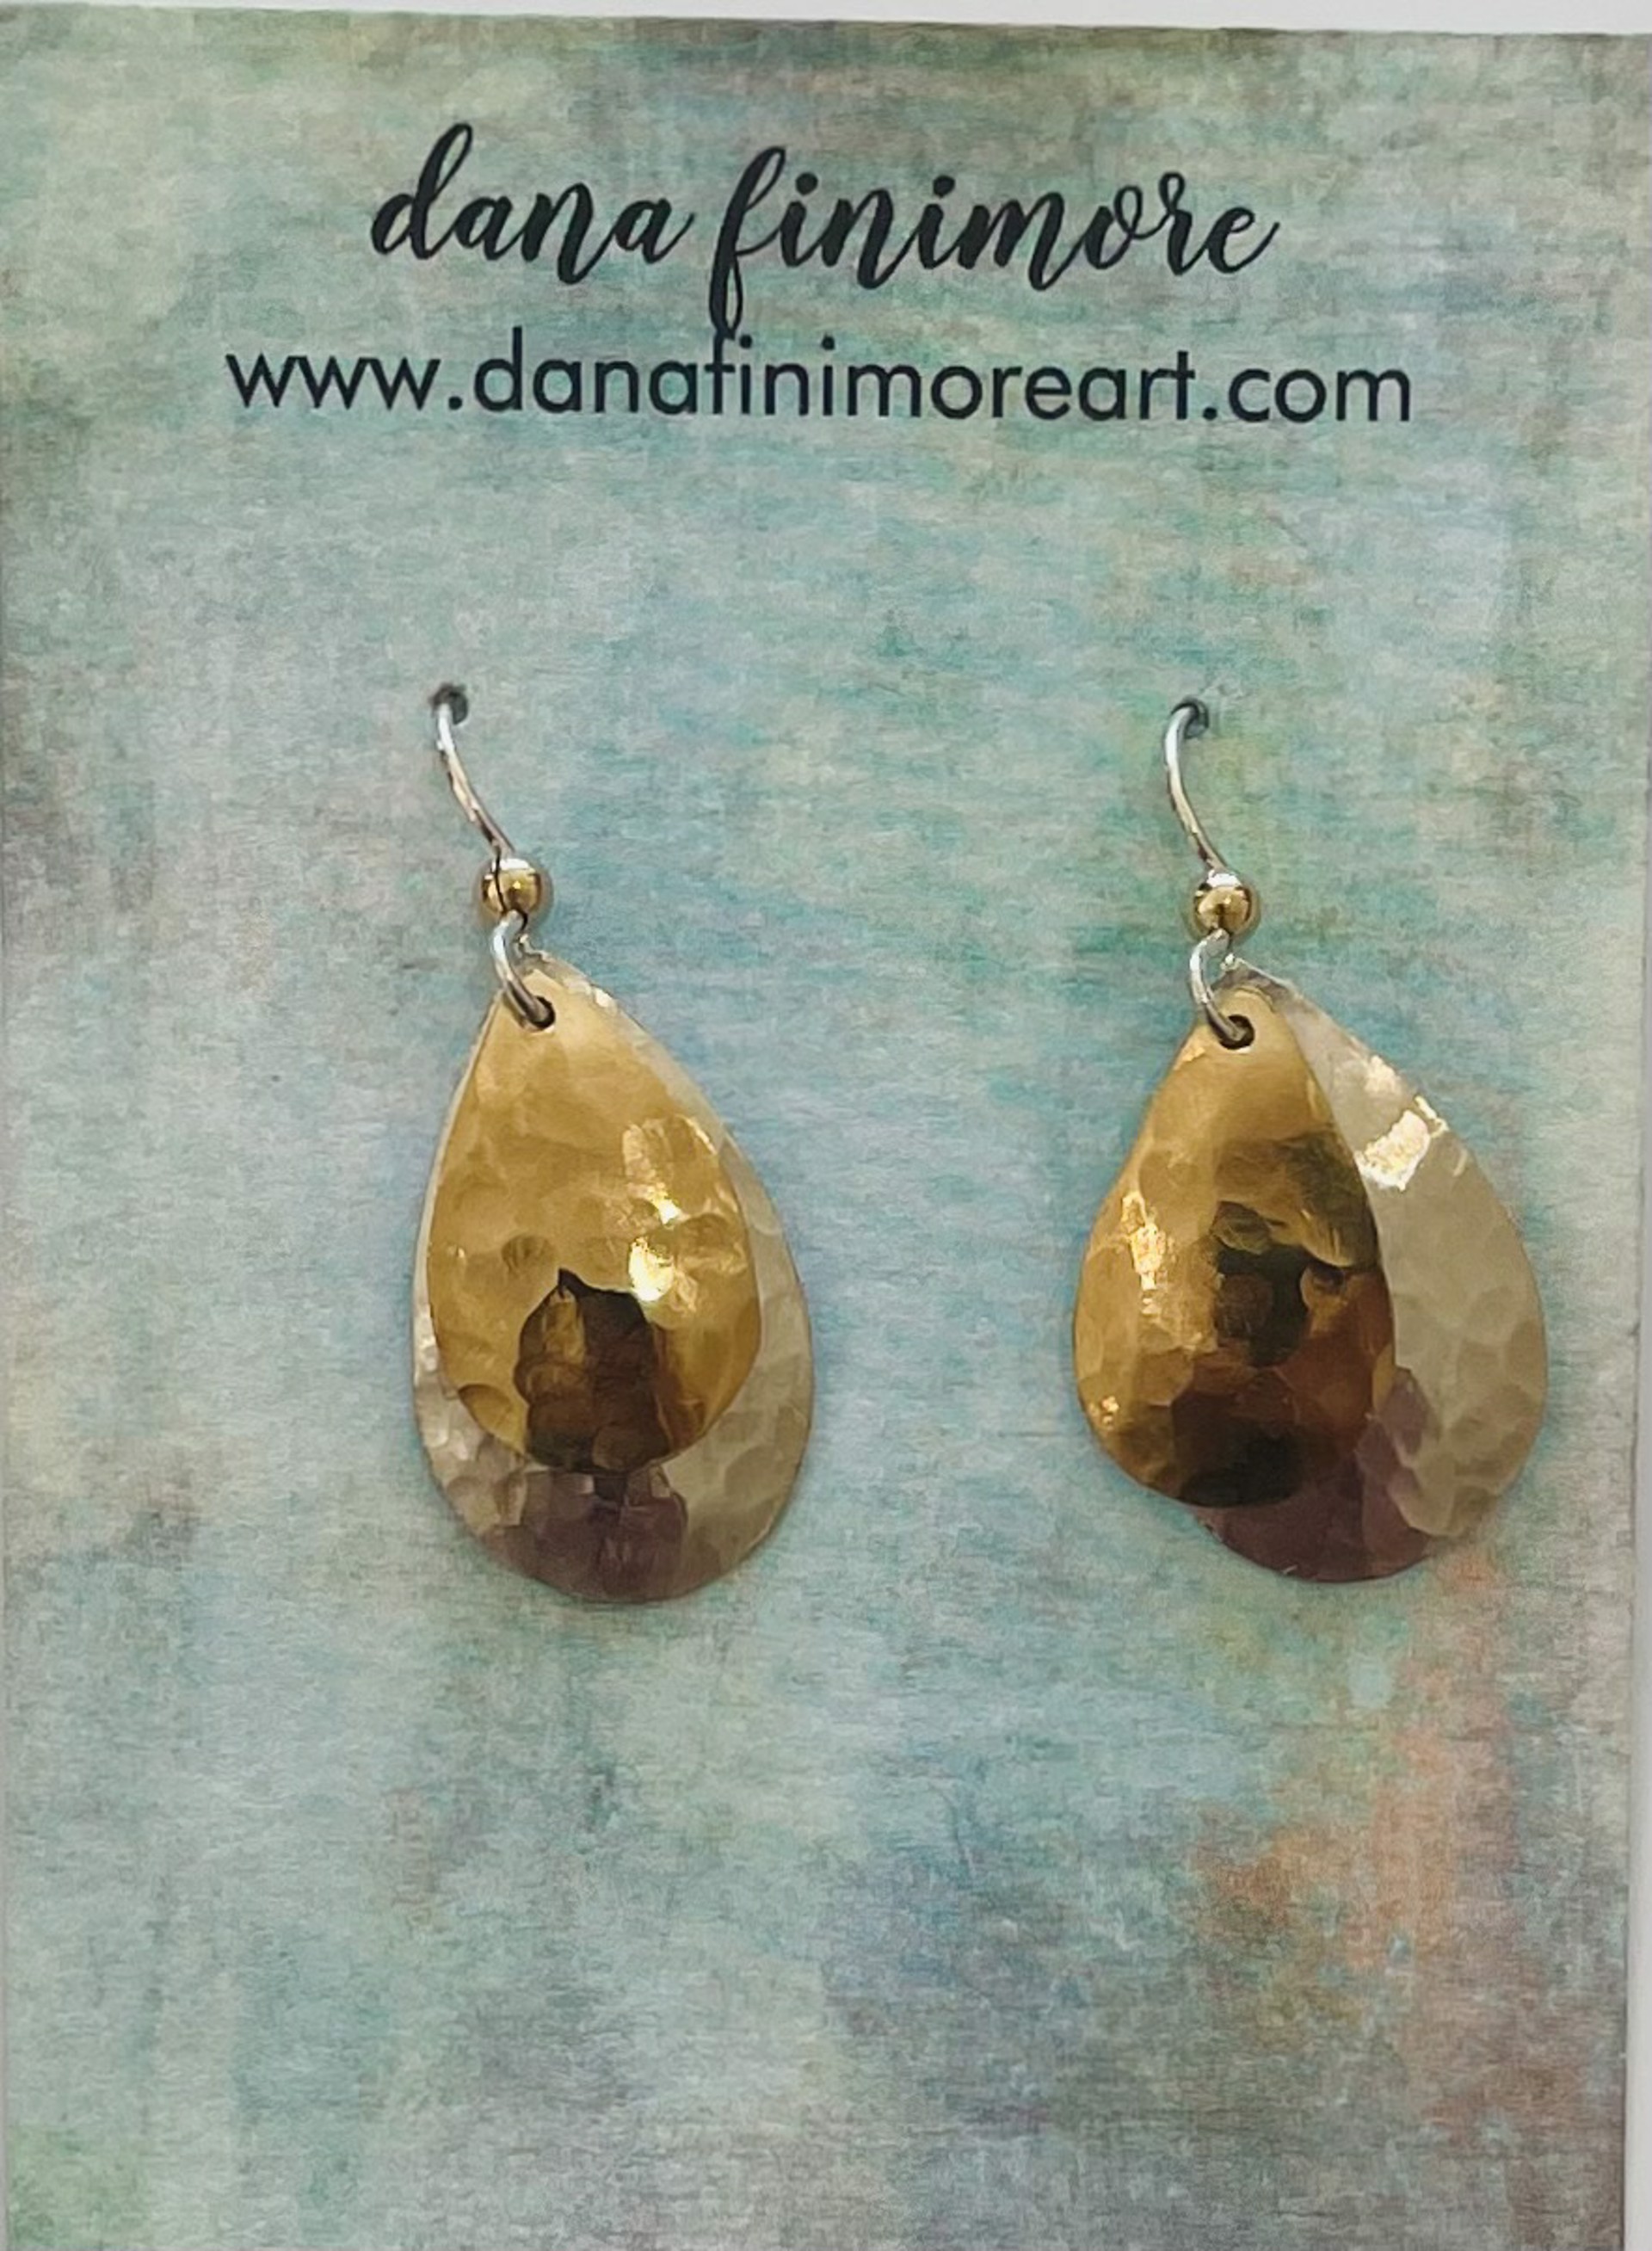 Textured Sterling Silver and Brass Teardrop Earrings by Dana Finimore